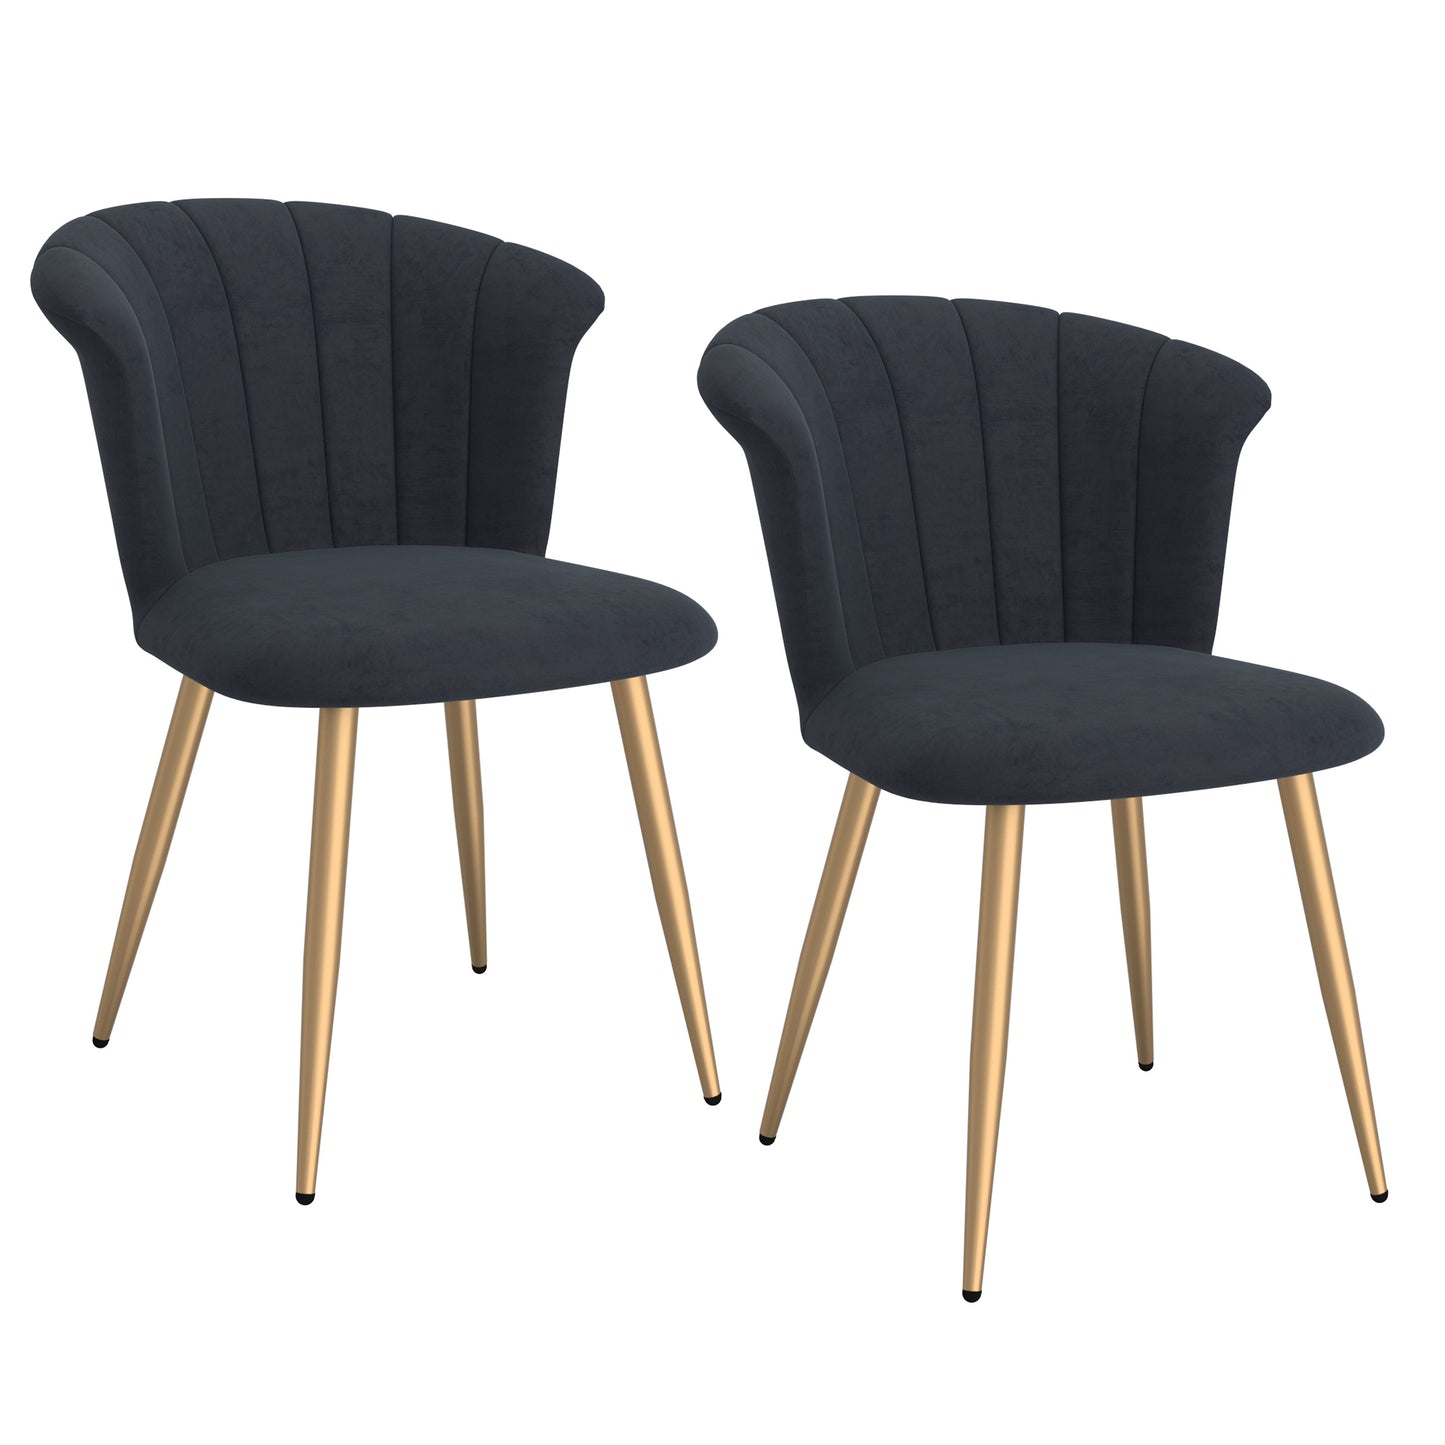 (ORCHID BLACK- 2 PACK)- VELVET FABRIC DINING CHAIRS